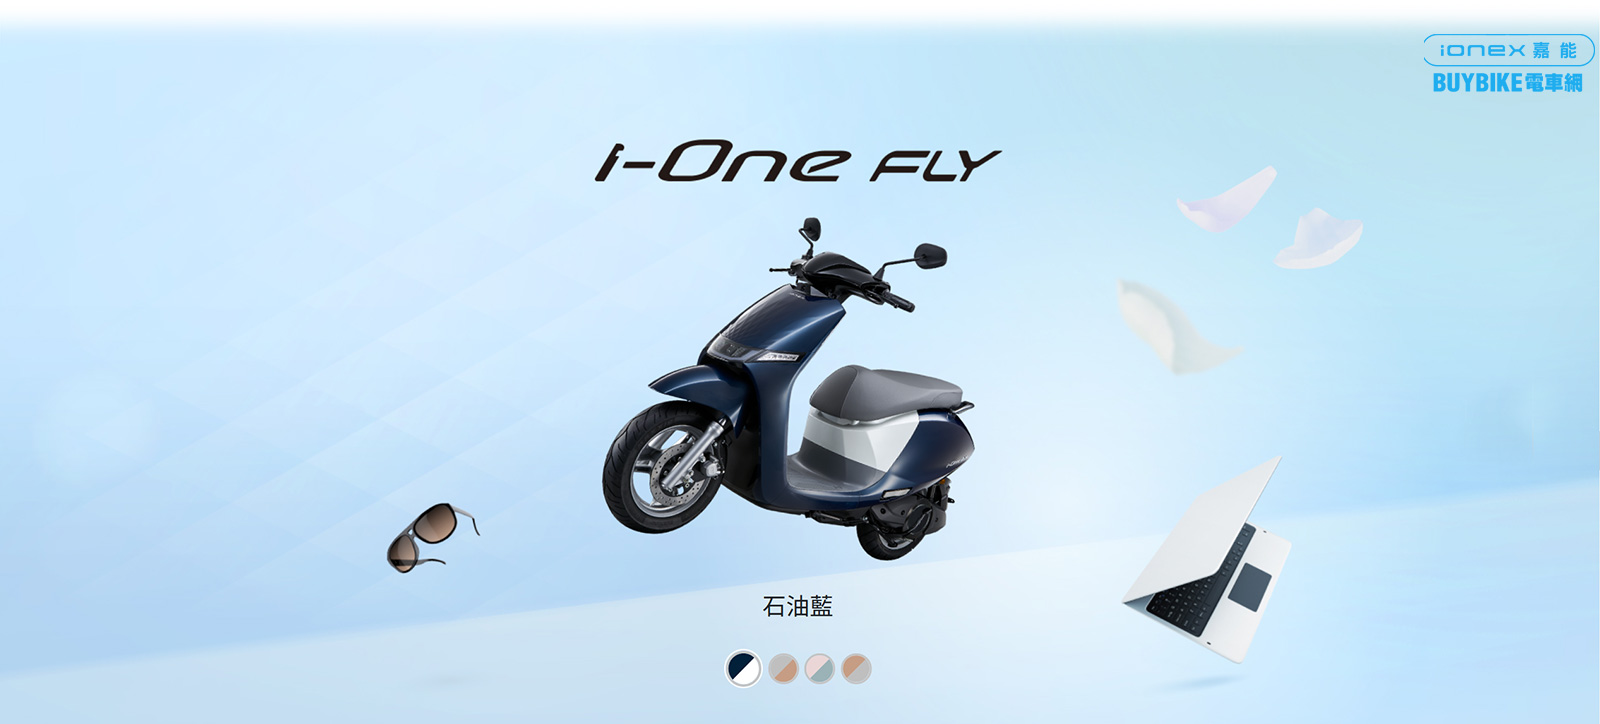 ione-fly-pic_10